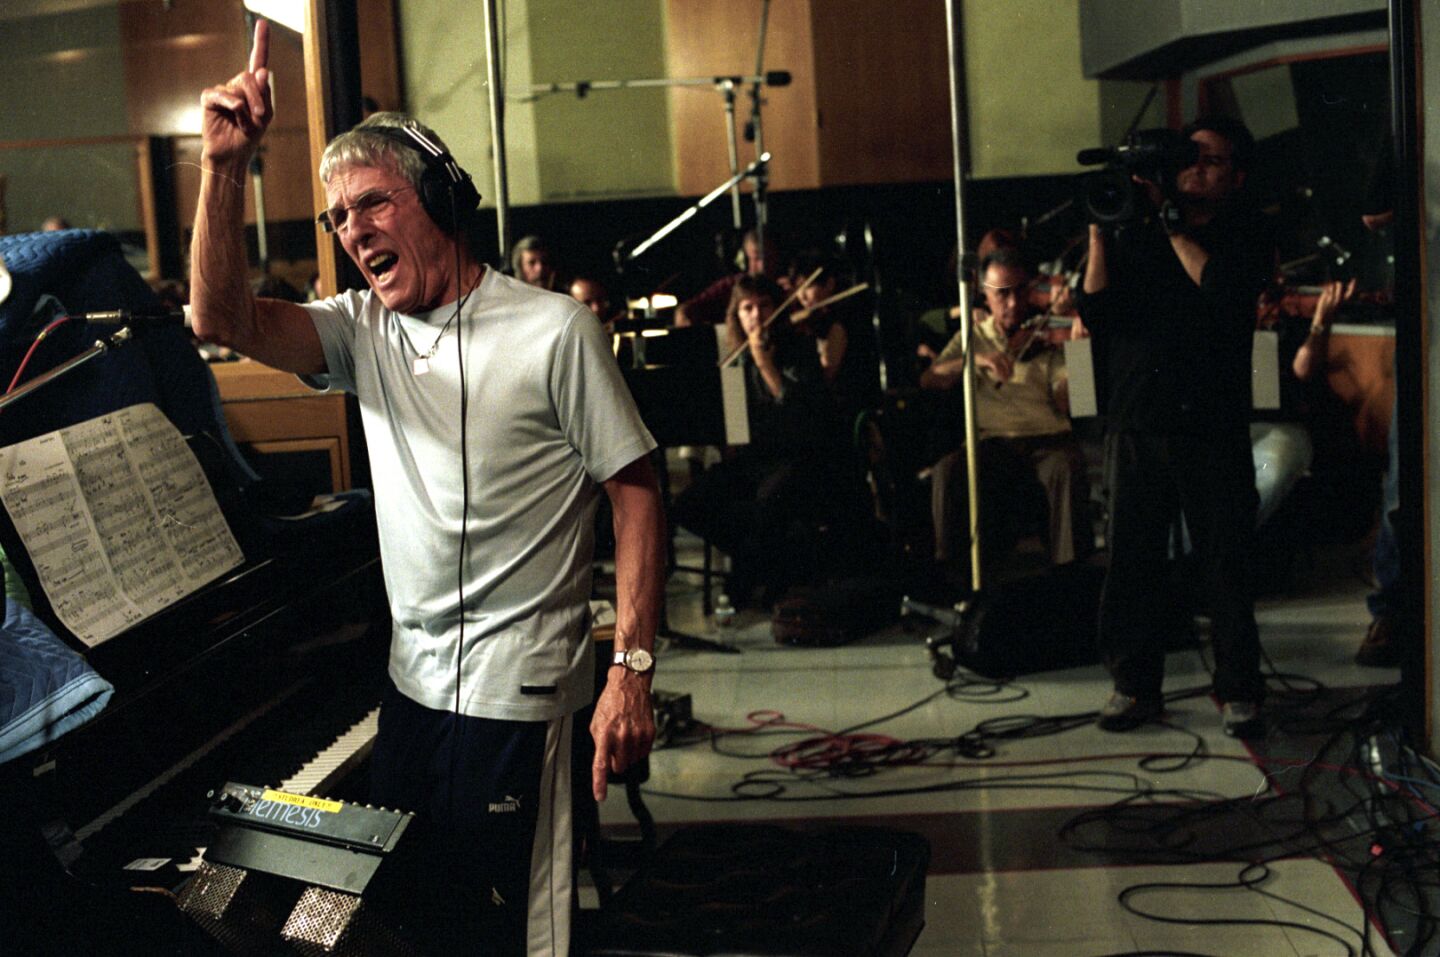 Burt Bacharach encourages musicians during a recording session